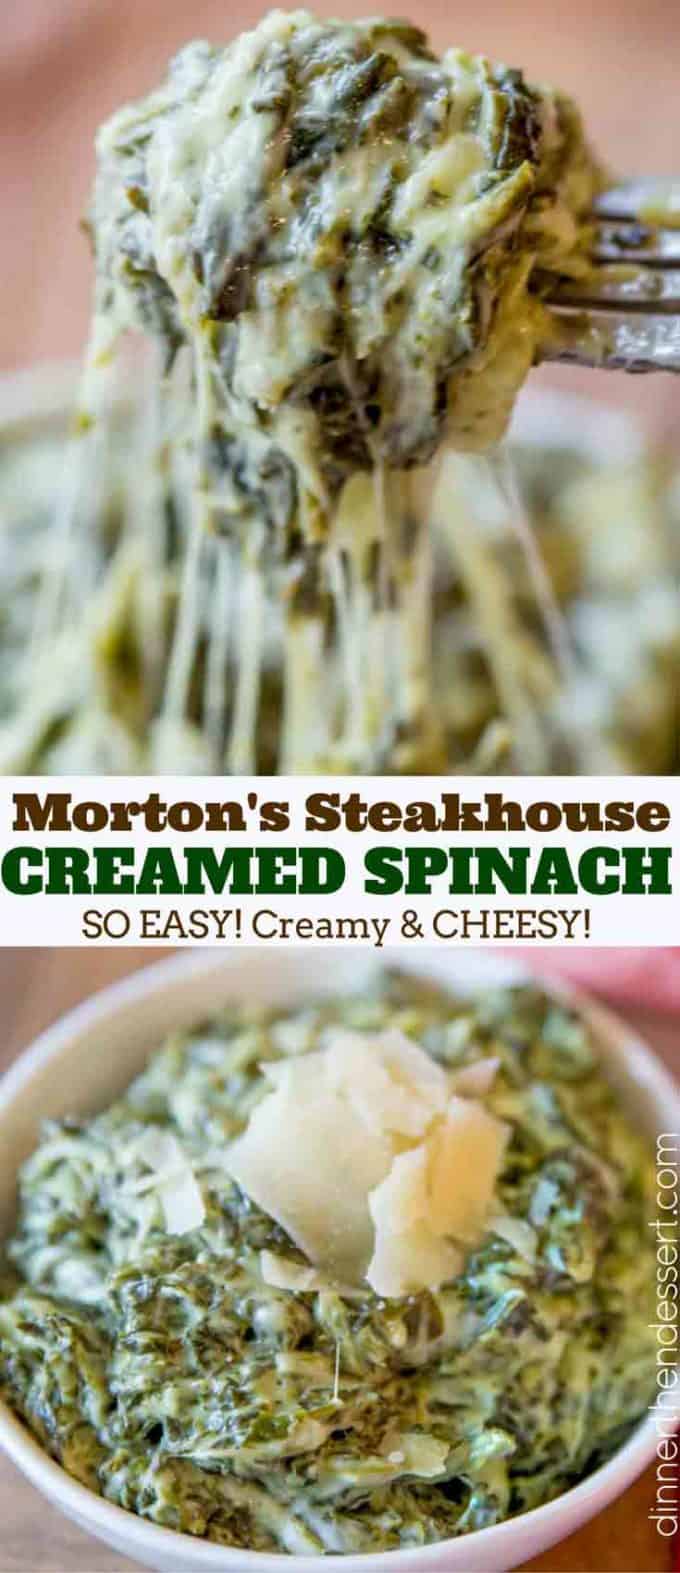 Creamy, Rich Classic Steakhouse Creamed Spinach Recipe That Takes Just A Few Minutes And Is The Perfect Side For A Holiday Roast Or Prime Rib. #creamedspinach #holidays #sidedish #spinach #cheesy